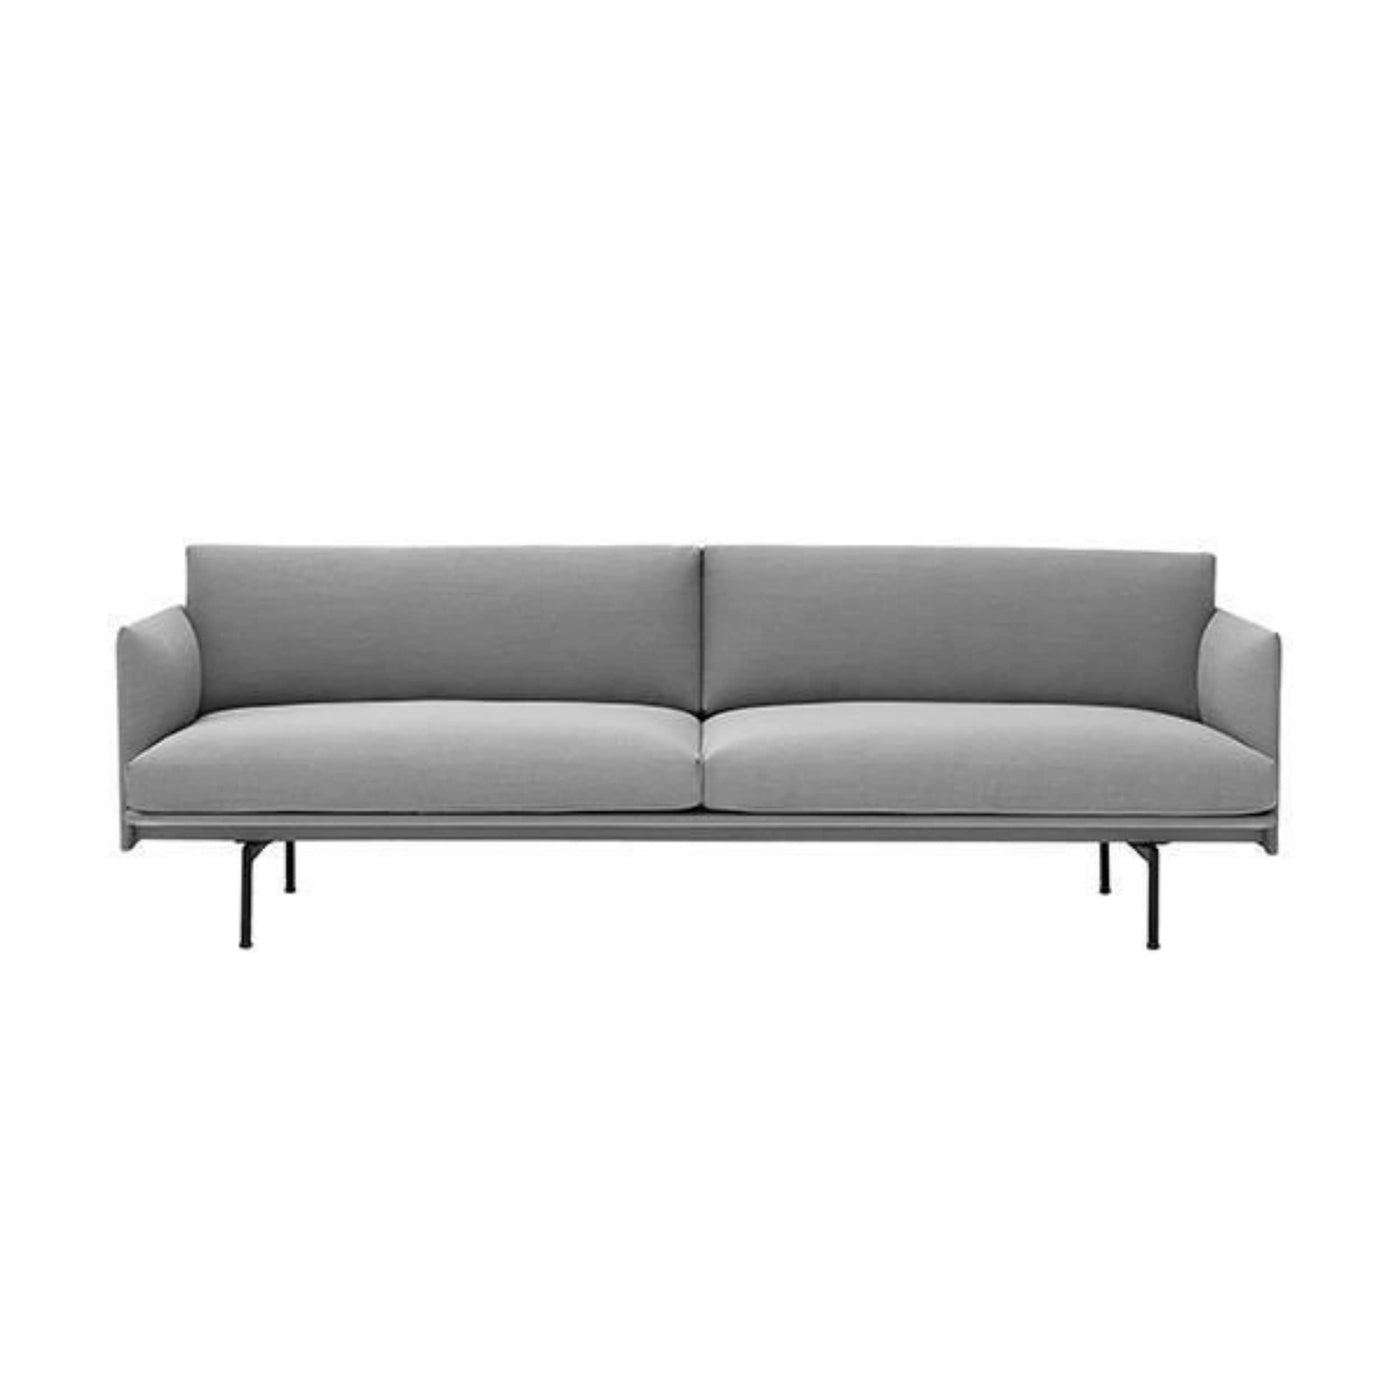 Muuto Outline 3 seater sofa with polished l aluminium legs. Available from someday designs. #colour_fiord-151